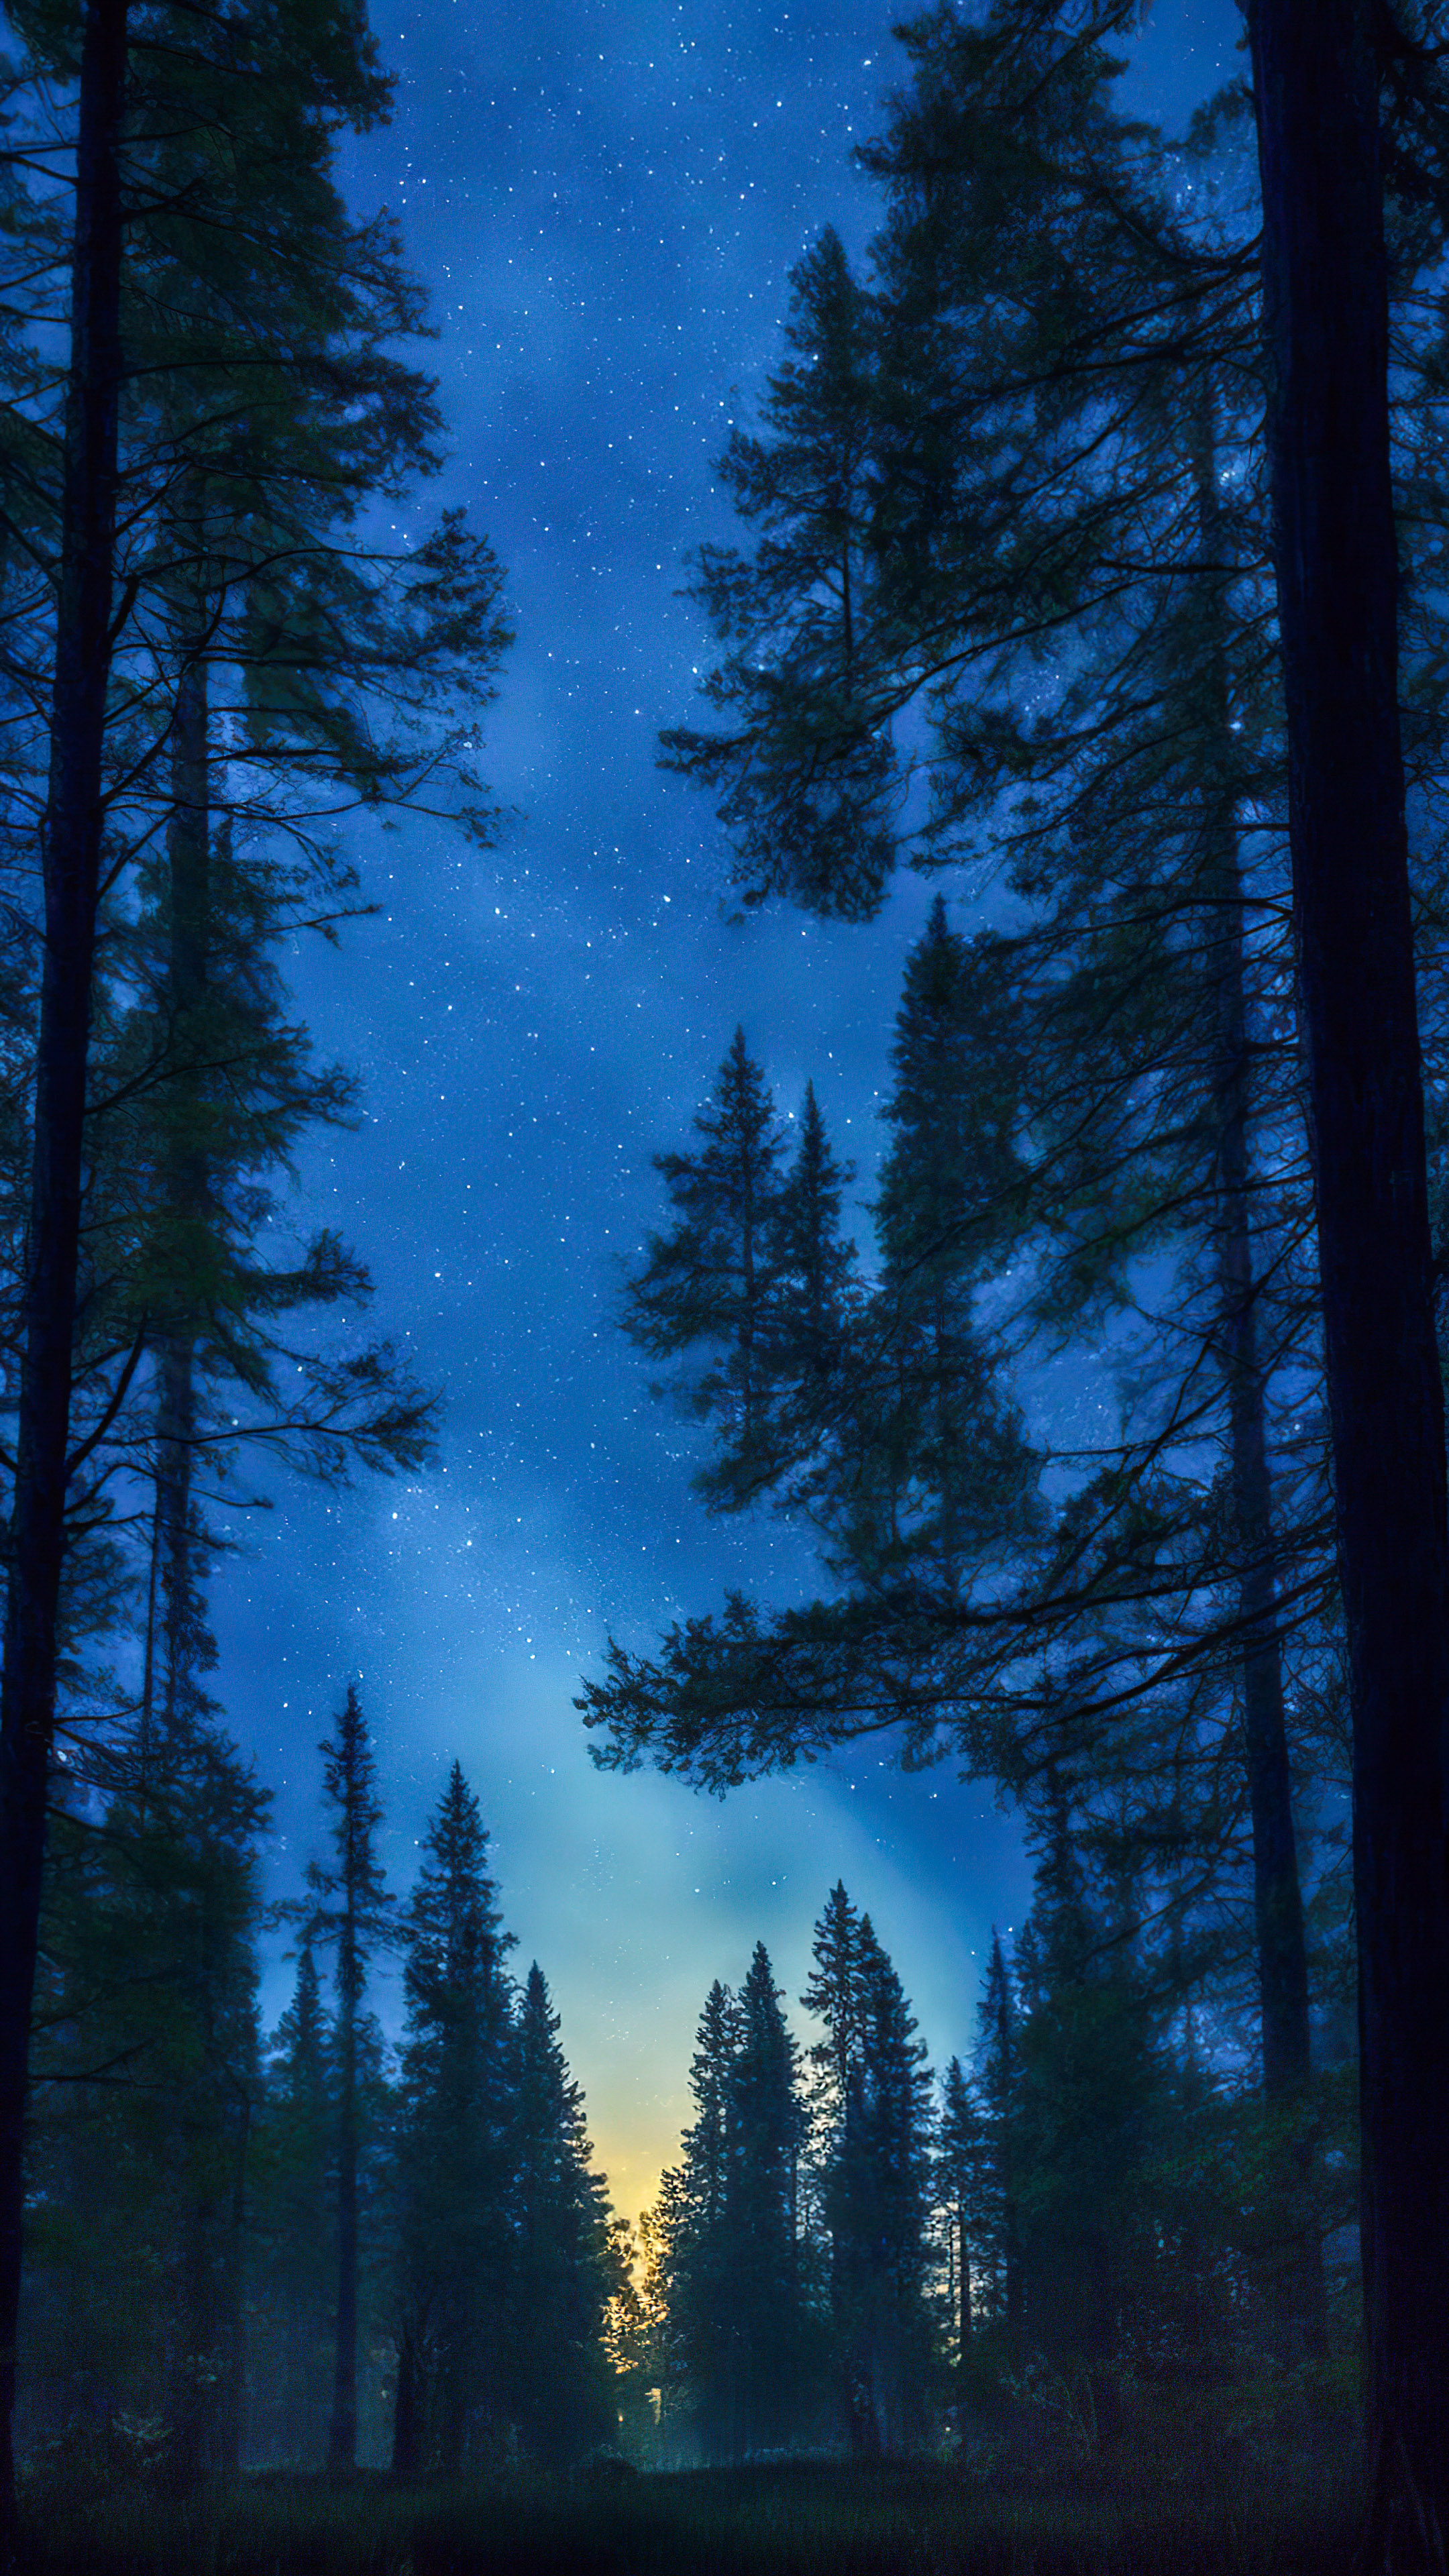 Get lost in the tranquility of night, with our background depicting a tranquil forest at night, with tall, ancient trees under a starry sky and a soft, moonlit glow.